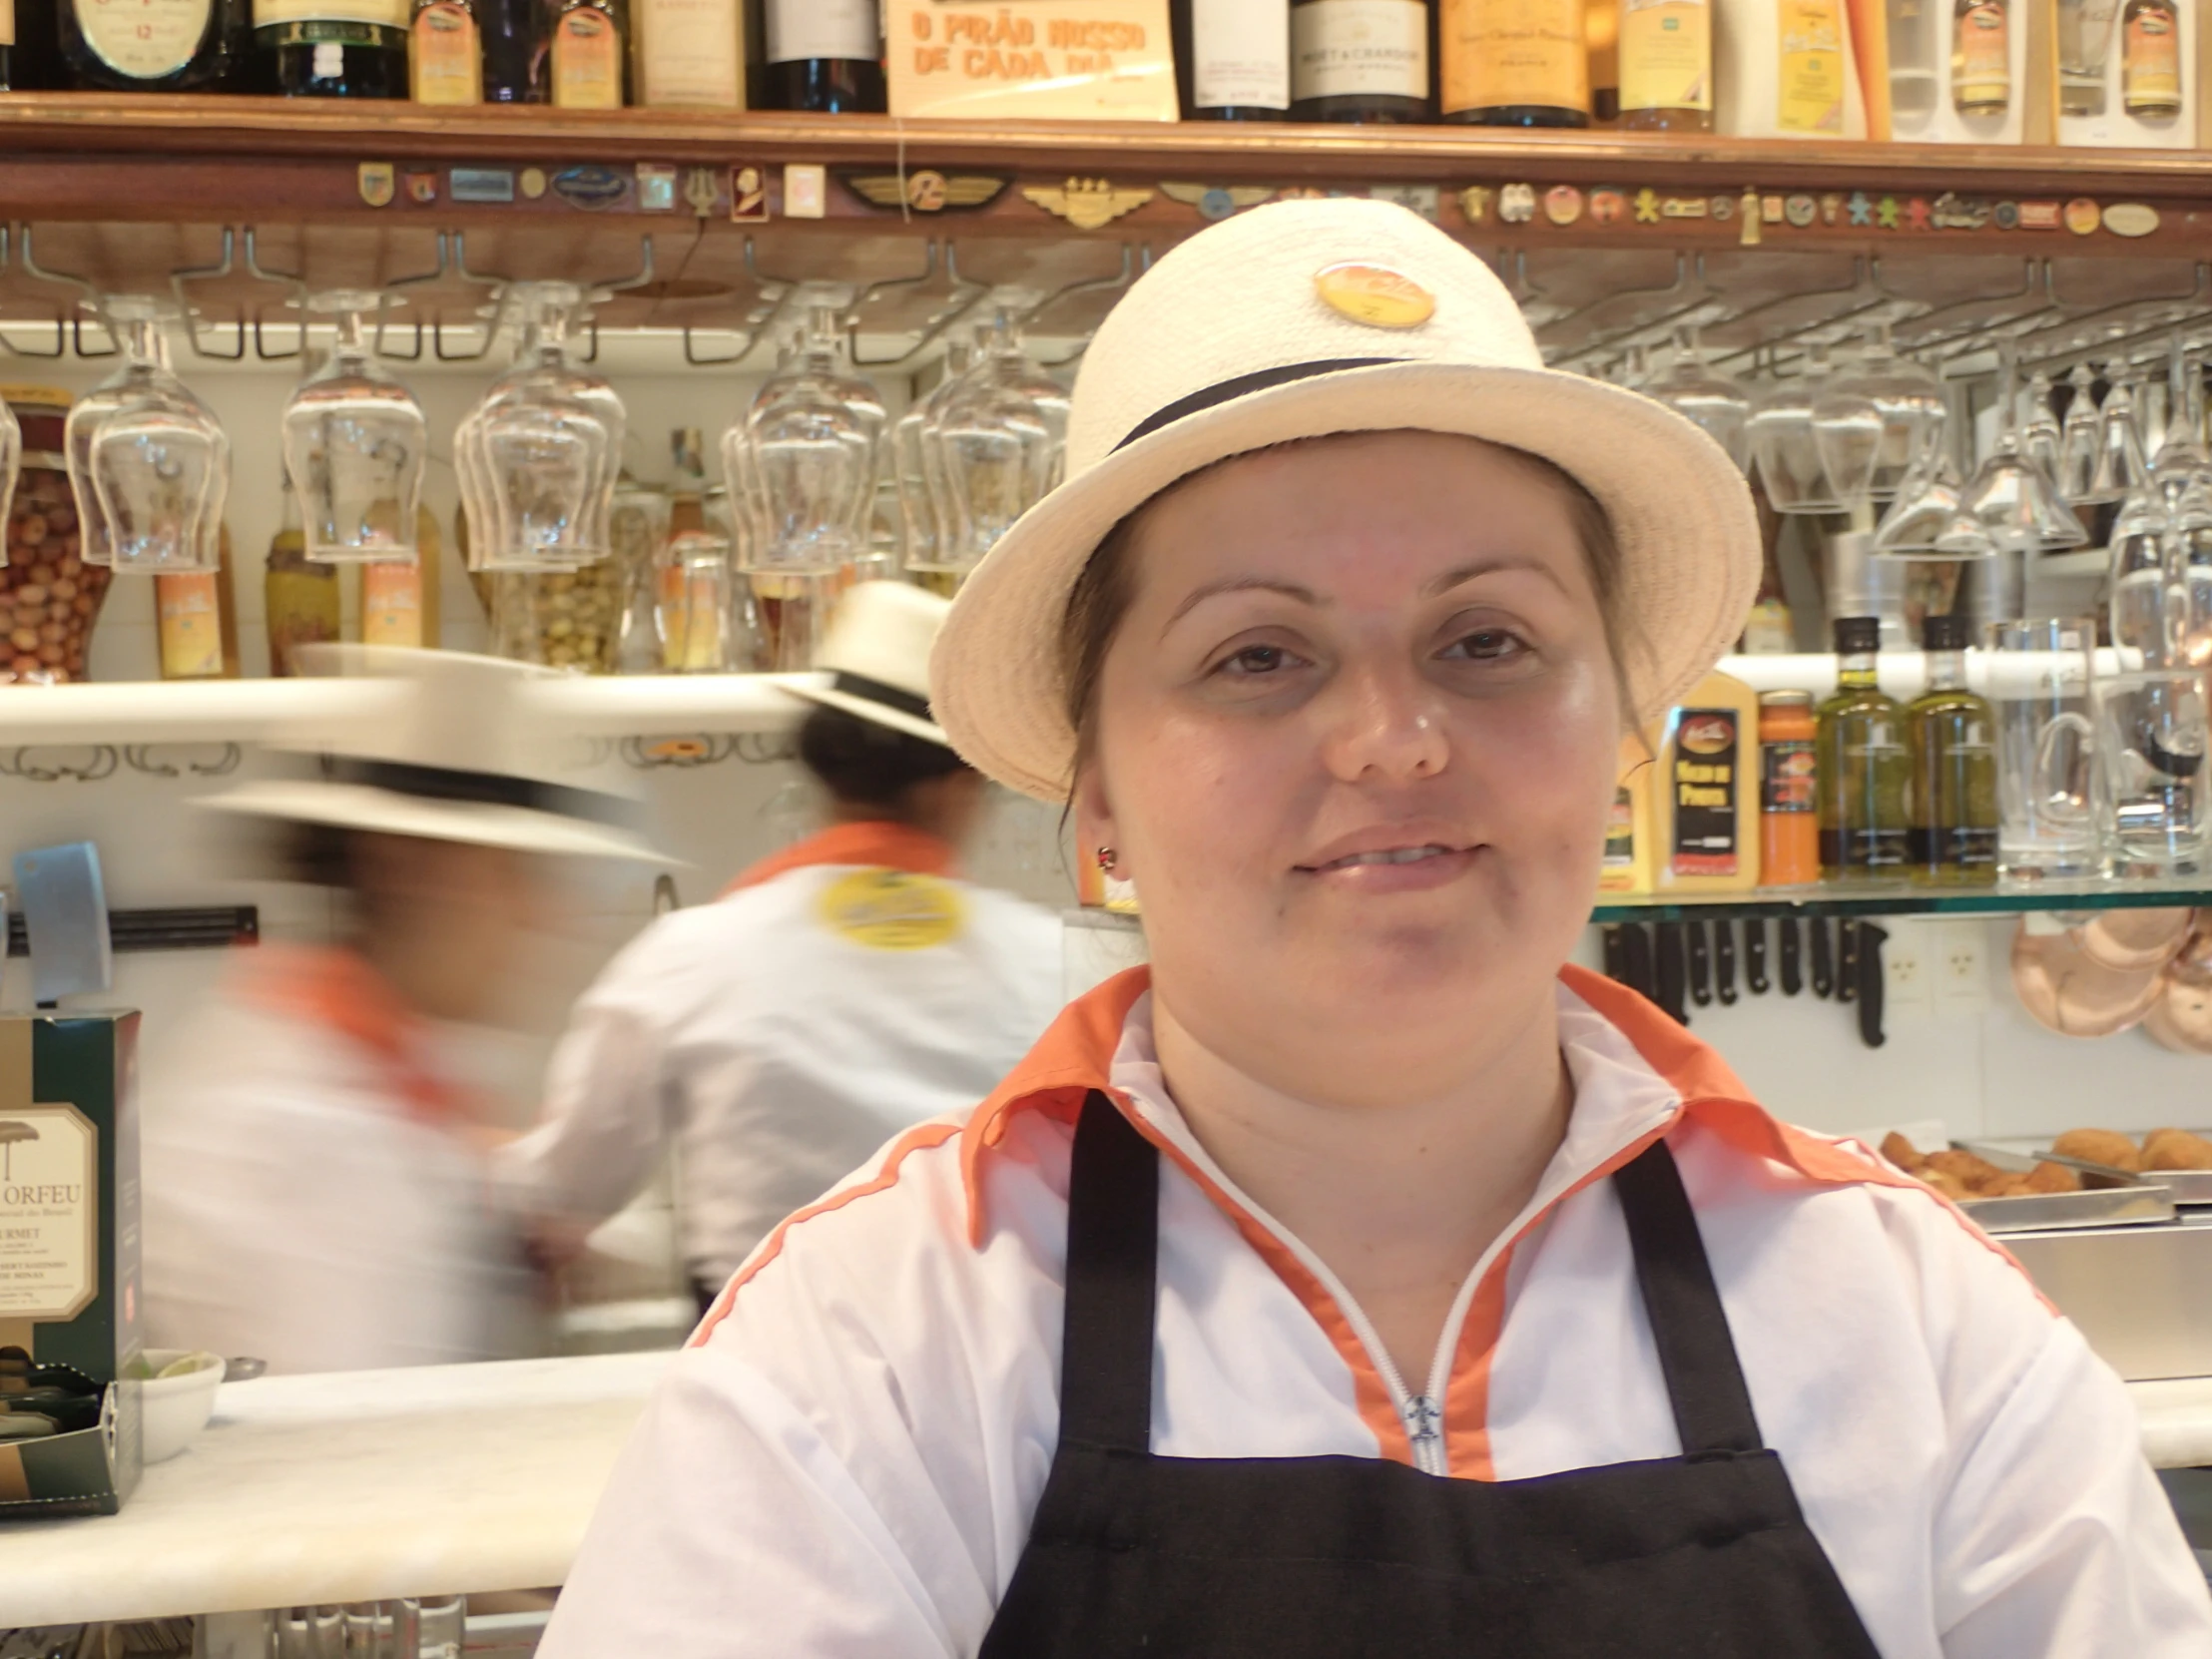 a woman with an apron and hat in front of a bar